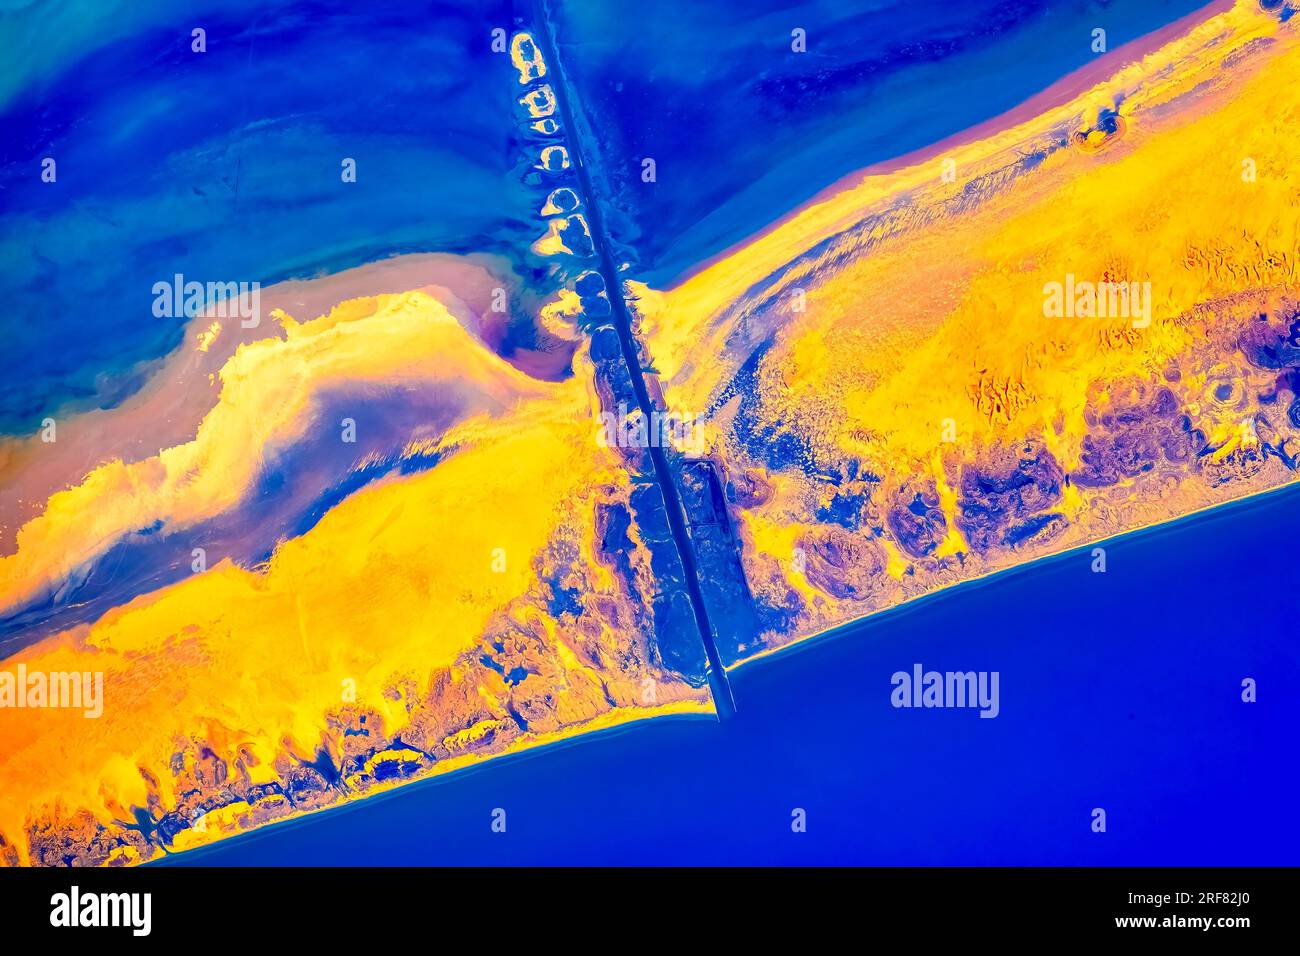 Mansfiel Channel in Padre Island southern Texas coast, USA. Digital enhancement of an image furnished by NASA Stock Photo